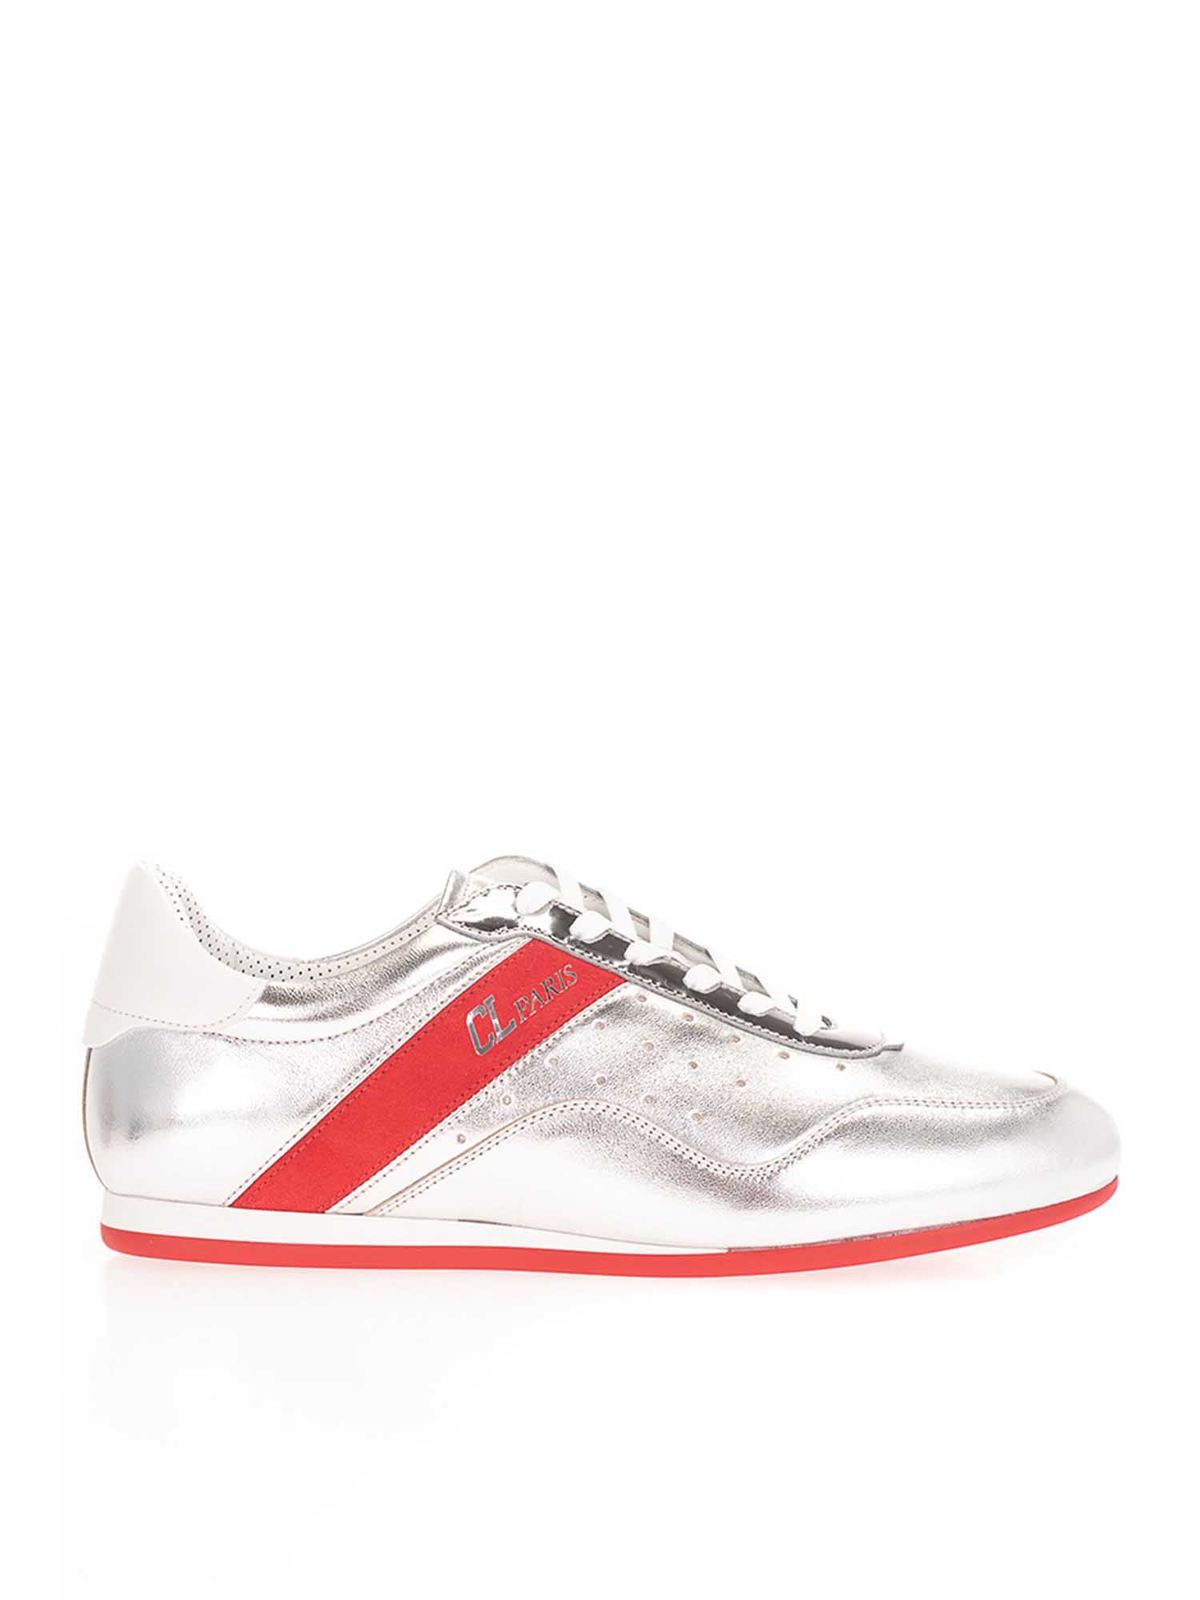 farvel Stå sammen Forældet Trainers Christian Louboutin - My K Low sneakers in silver color and red -  1210941CN1H